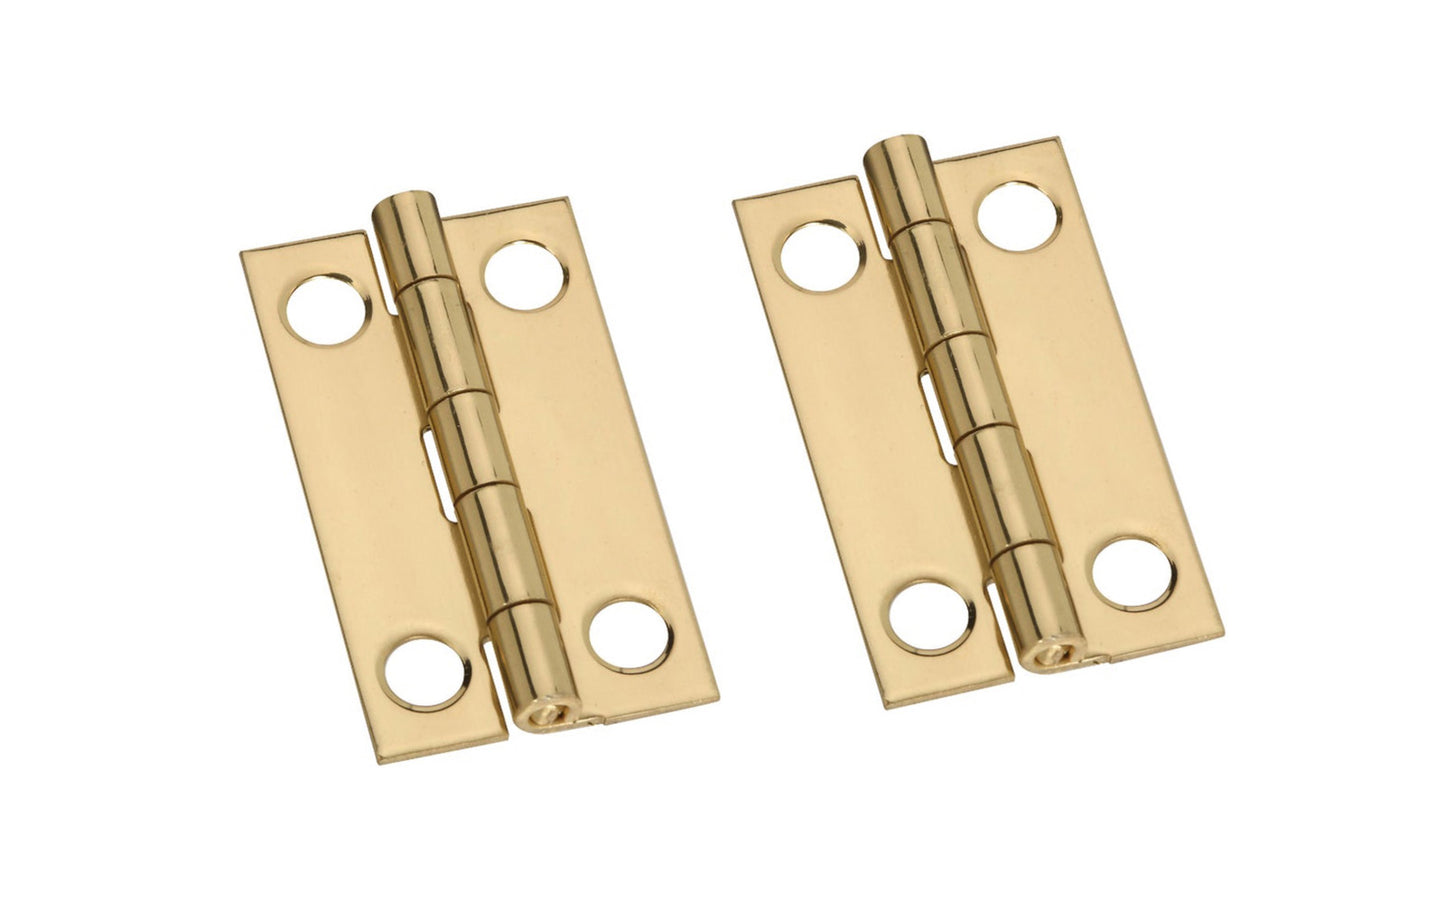 1-1/2" x 7/8" Solid Brass Hinges ~ 2 Pack ~These solid brass hinges add a decorative appearance to small boxes, jewelry boxes, small lightweight cabinet doors, craft projects, etc. Made of solid brass material with a bright brass finish. 1-1/2" high x 7/8" wide. Surface mount. Non-removable pin. Pair of hinges. National Hardware Model No. N211-219. 